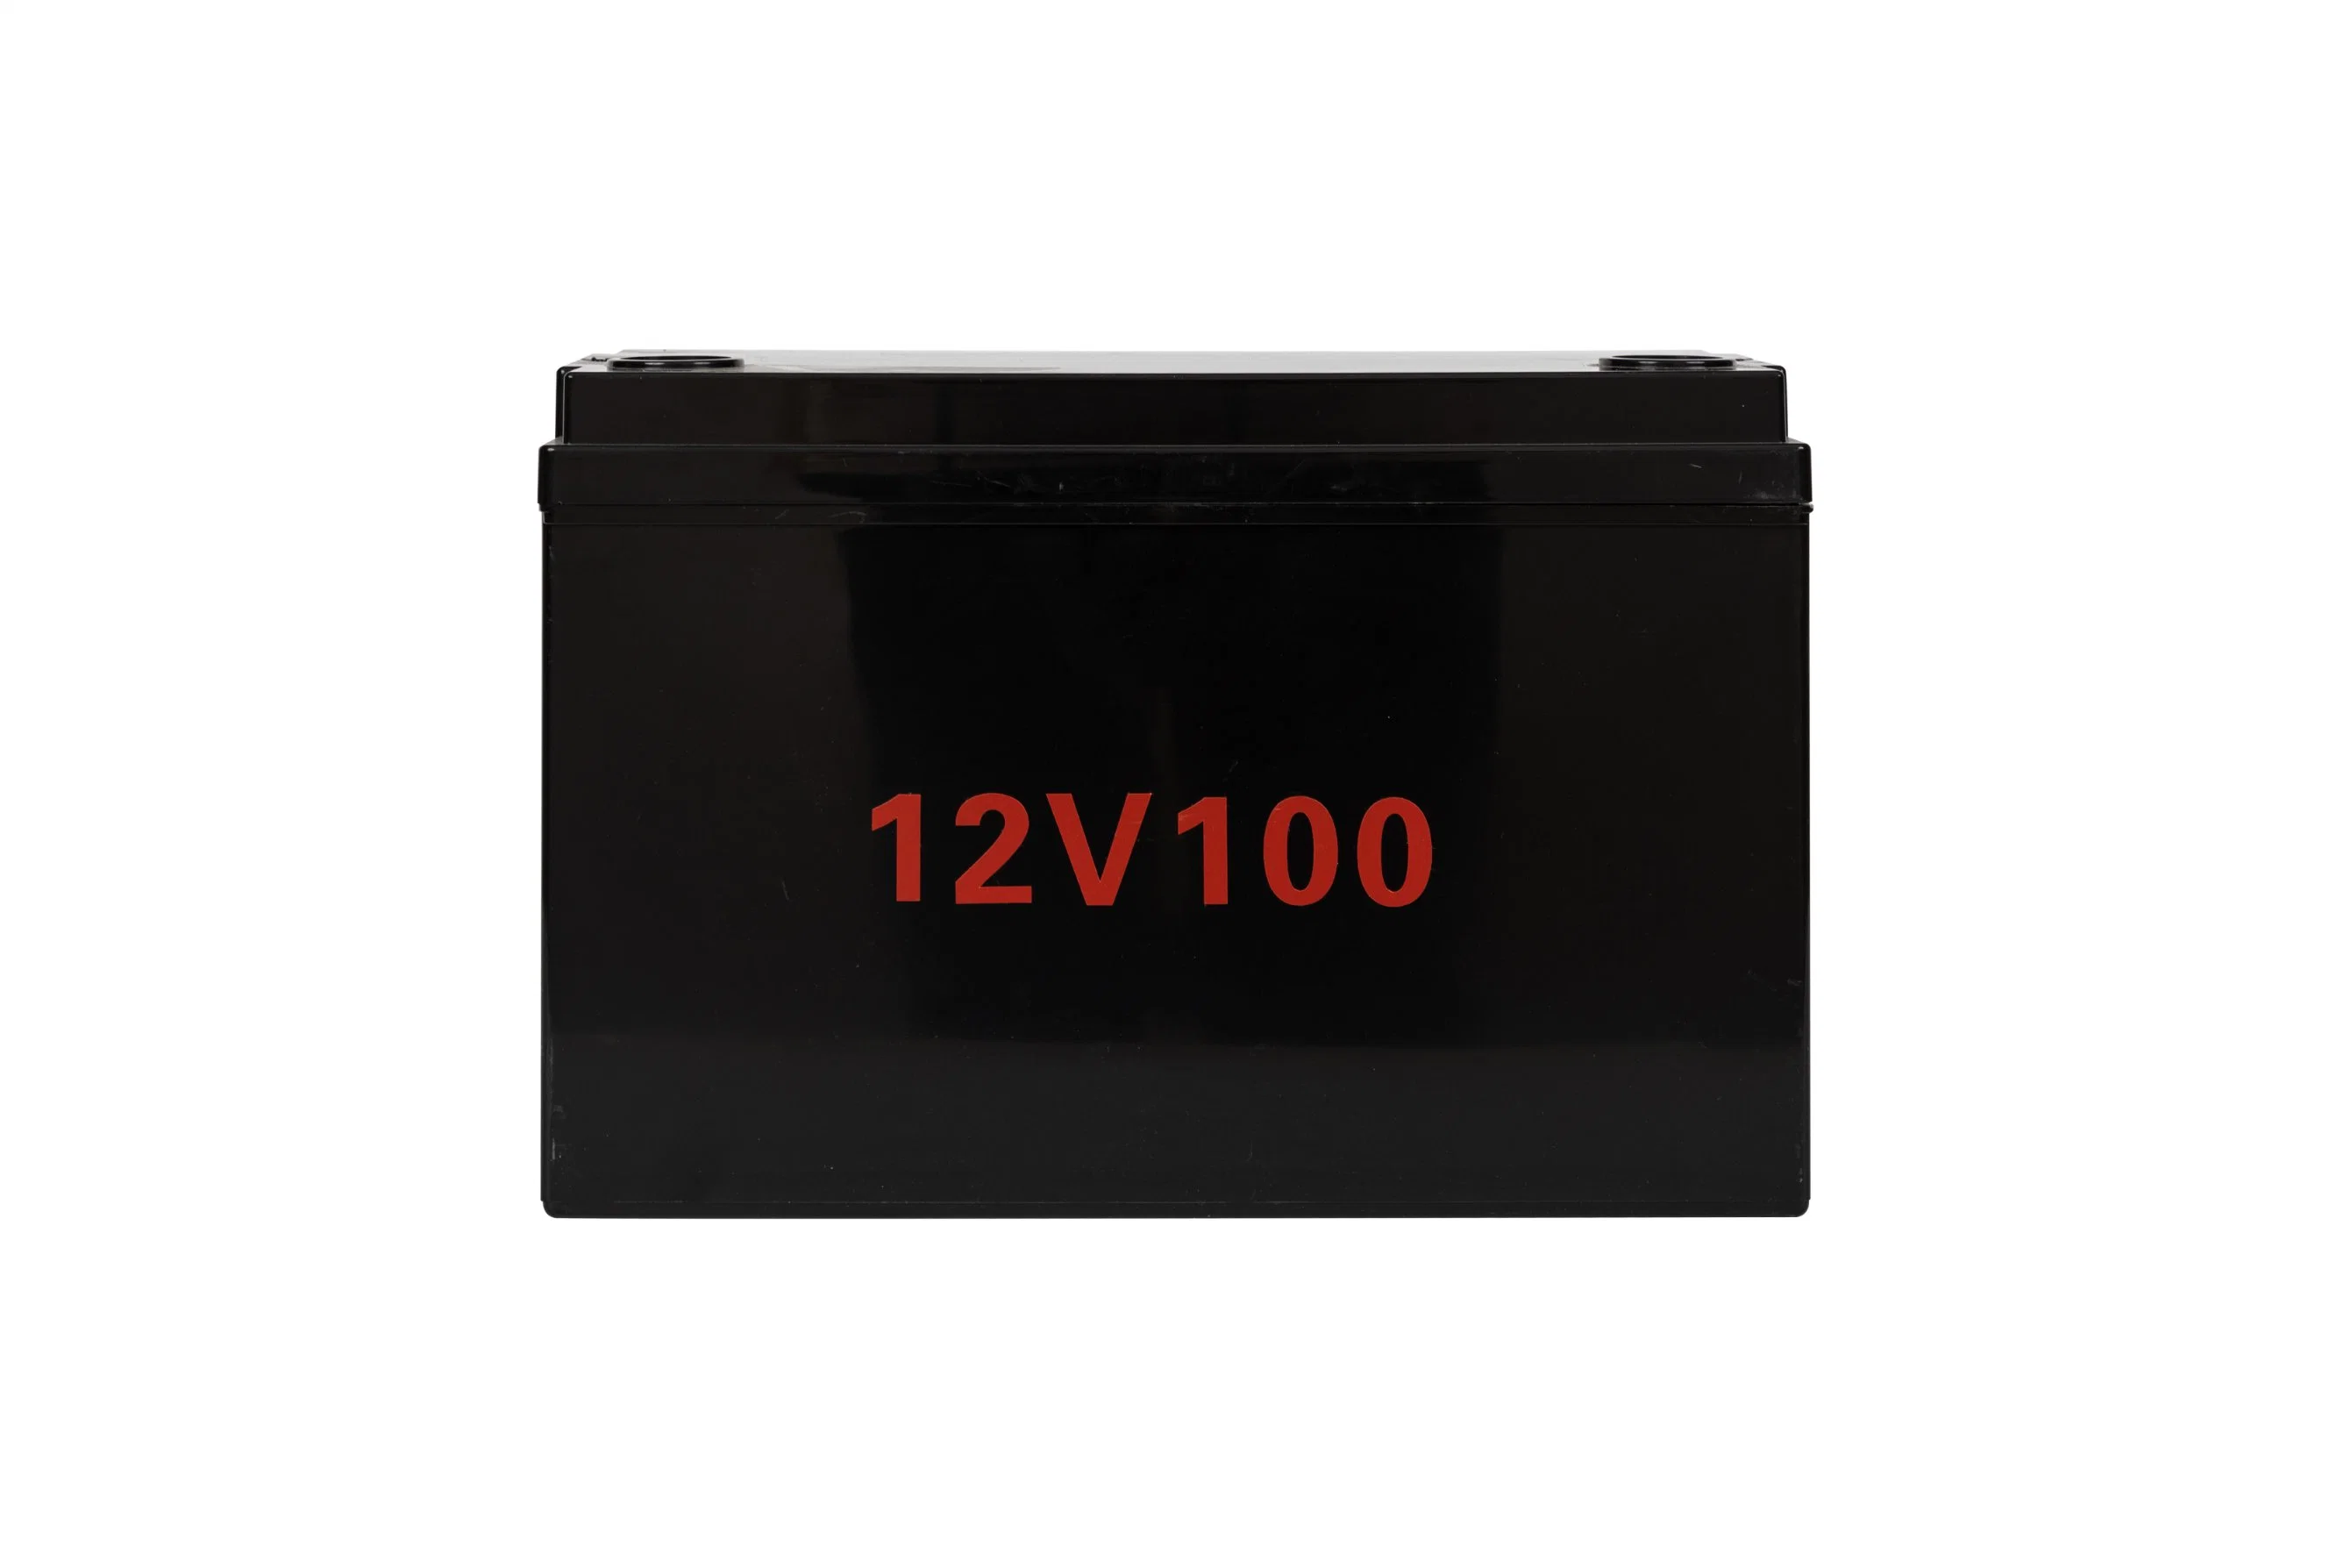 Battery 12V 100ah/150ah/200ah Deep-Cycle-Gel Solar Battery for VRLA/SLA/SMF/Mf/AGM/Rechargeable/UPS/Lead-Acid/Pack/for Power Storage/Inverter/Scooter/Lithium